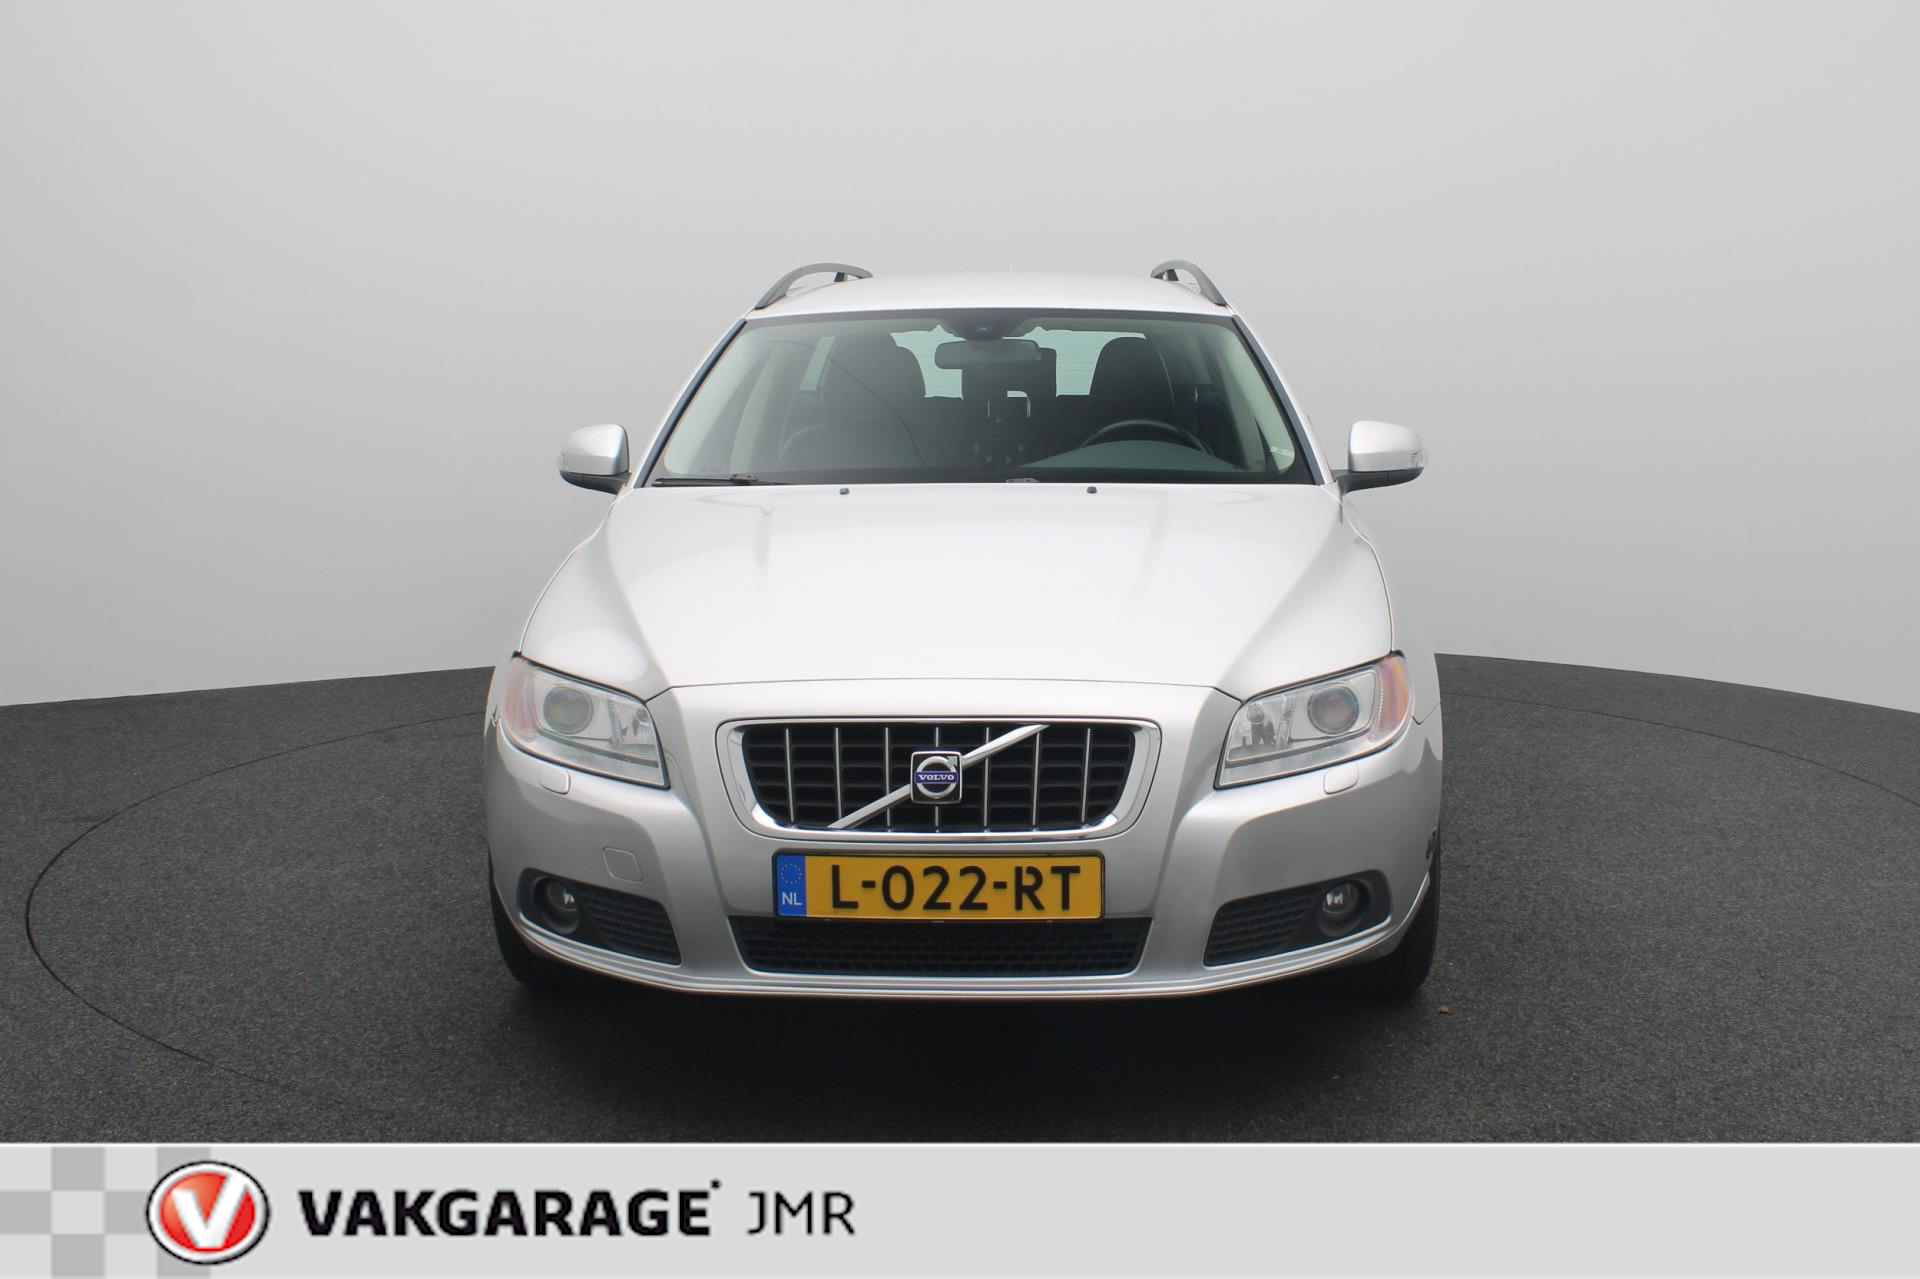 Volvo V70 2.5FT Momentum Youngtimer Trekhaak - PDC Achter - Stoel + Achterbank verwarming - Bluetooth - Climate en Cruise Control - 3/39